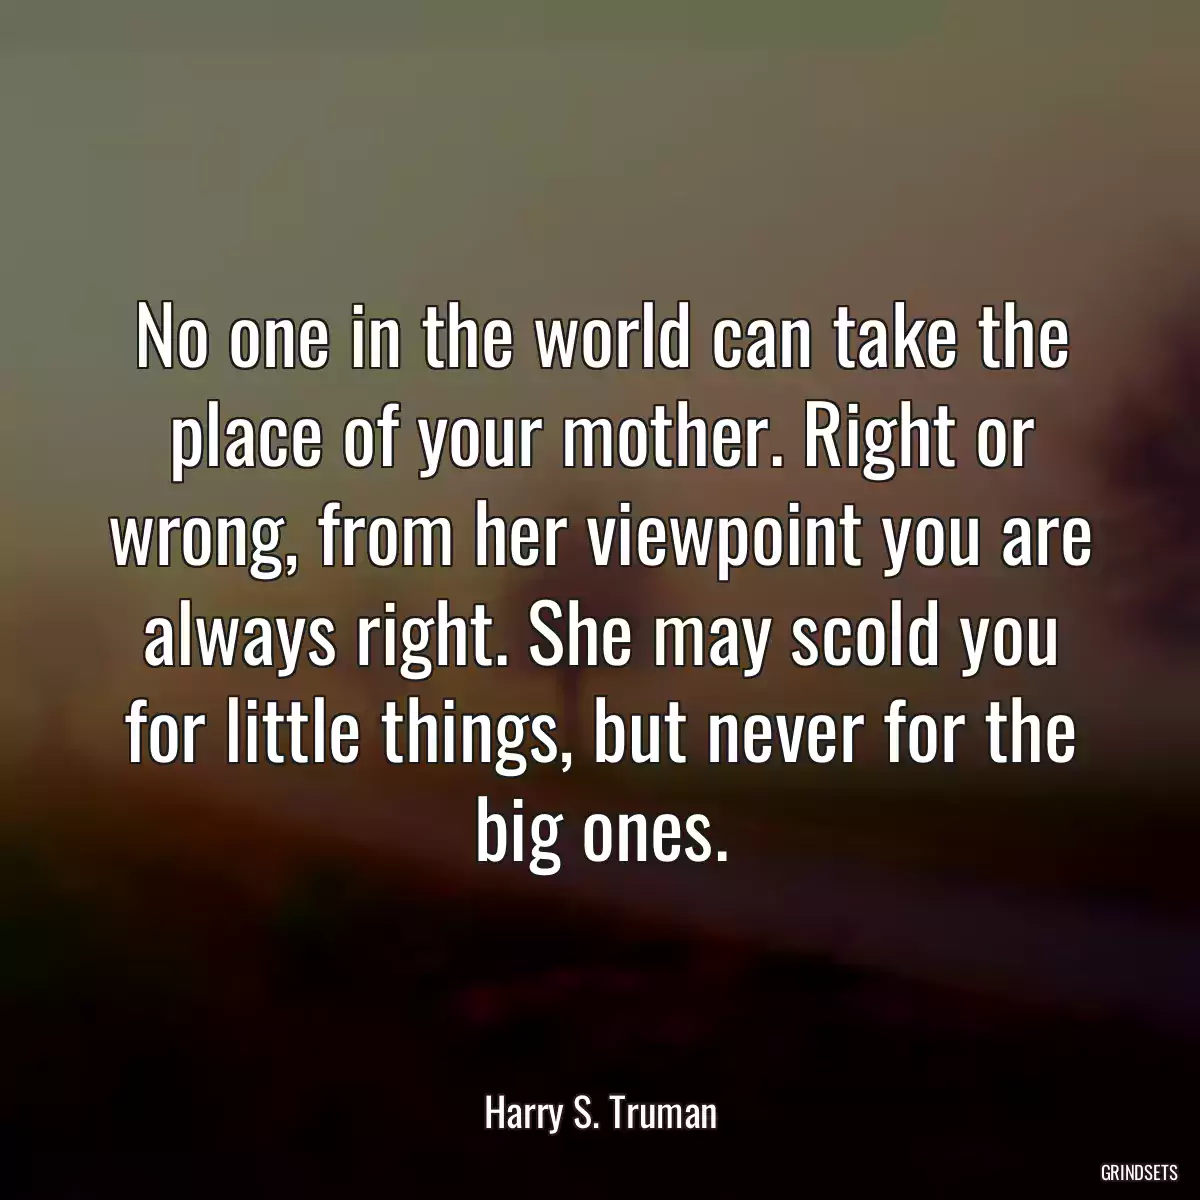 No one in the world can take the place of your mother. Right or wrong, from her viewpoint you are always right. She may scold you for little things, but never for the big ones.